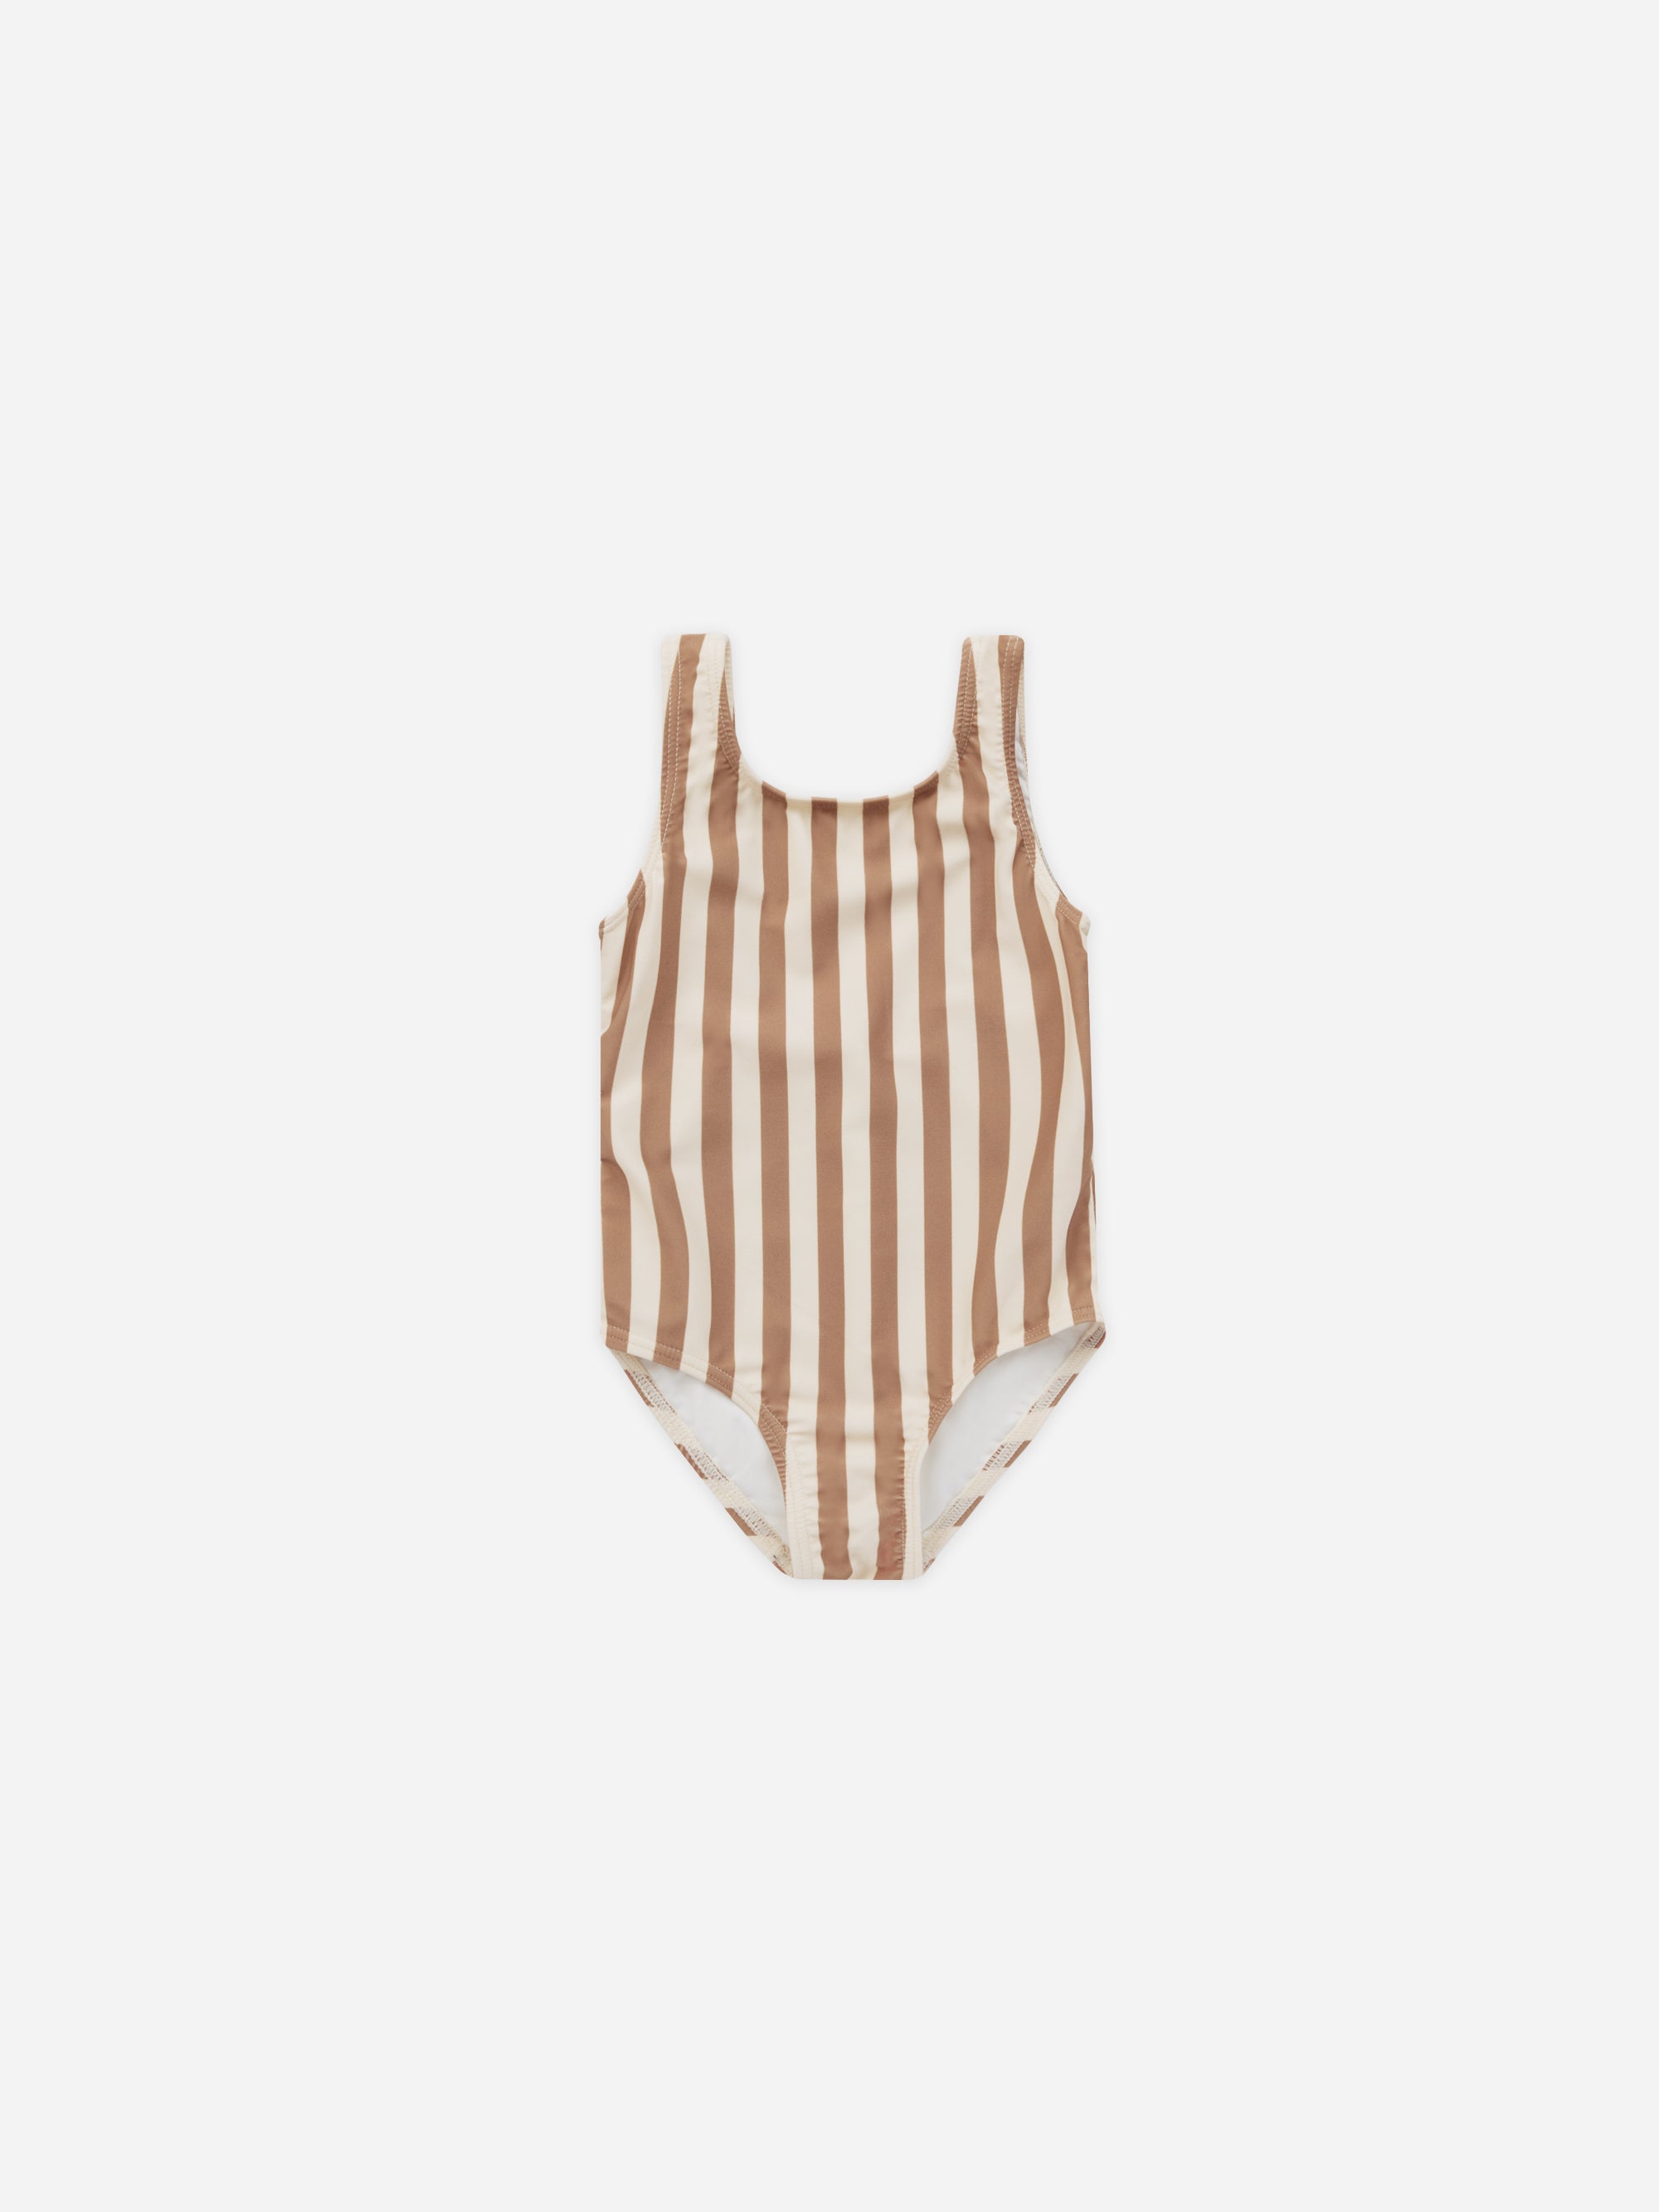 Moxie One-Piece || Clay Stripe - Rylee + Cru | Kids Clothes | Trendy Baby Clothes | Modern Infant Outfits |